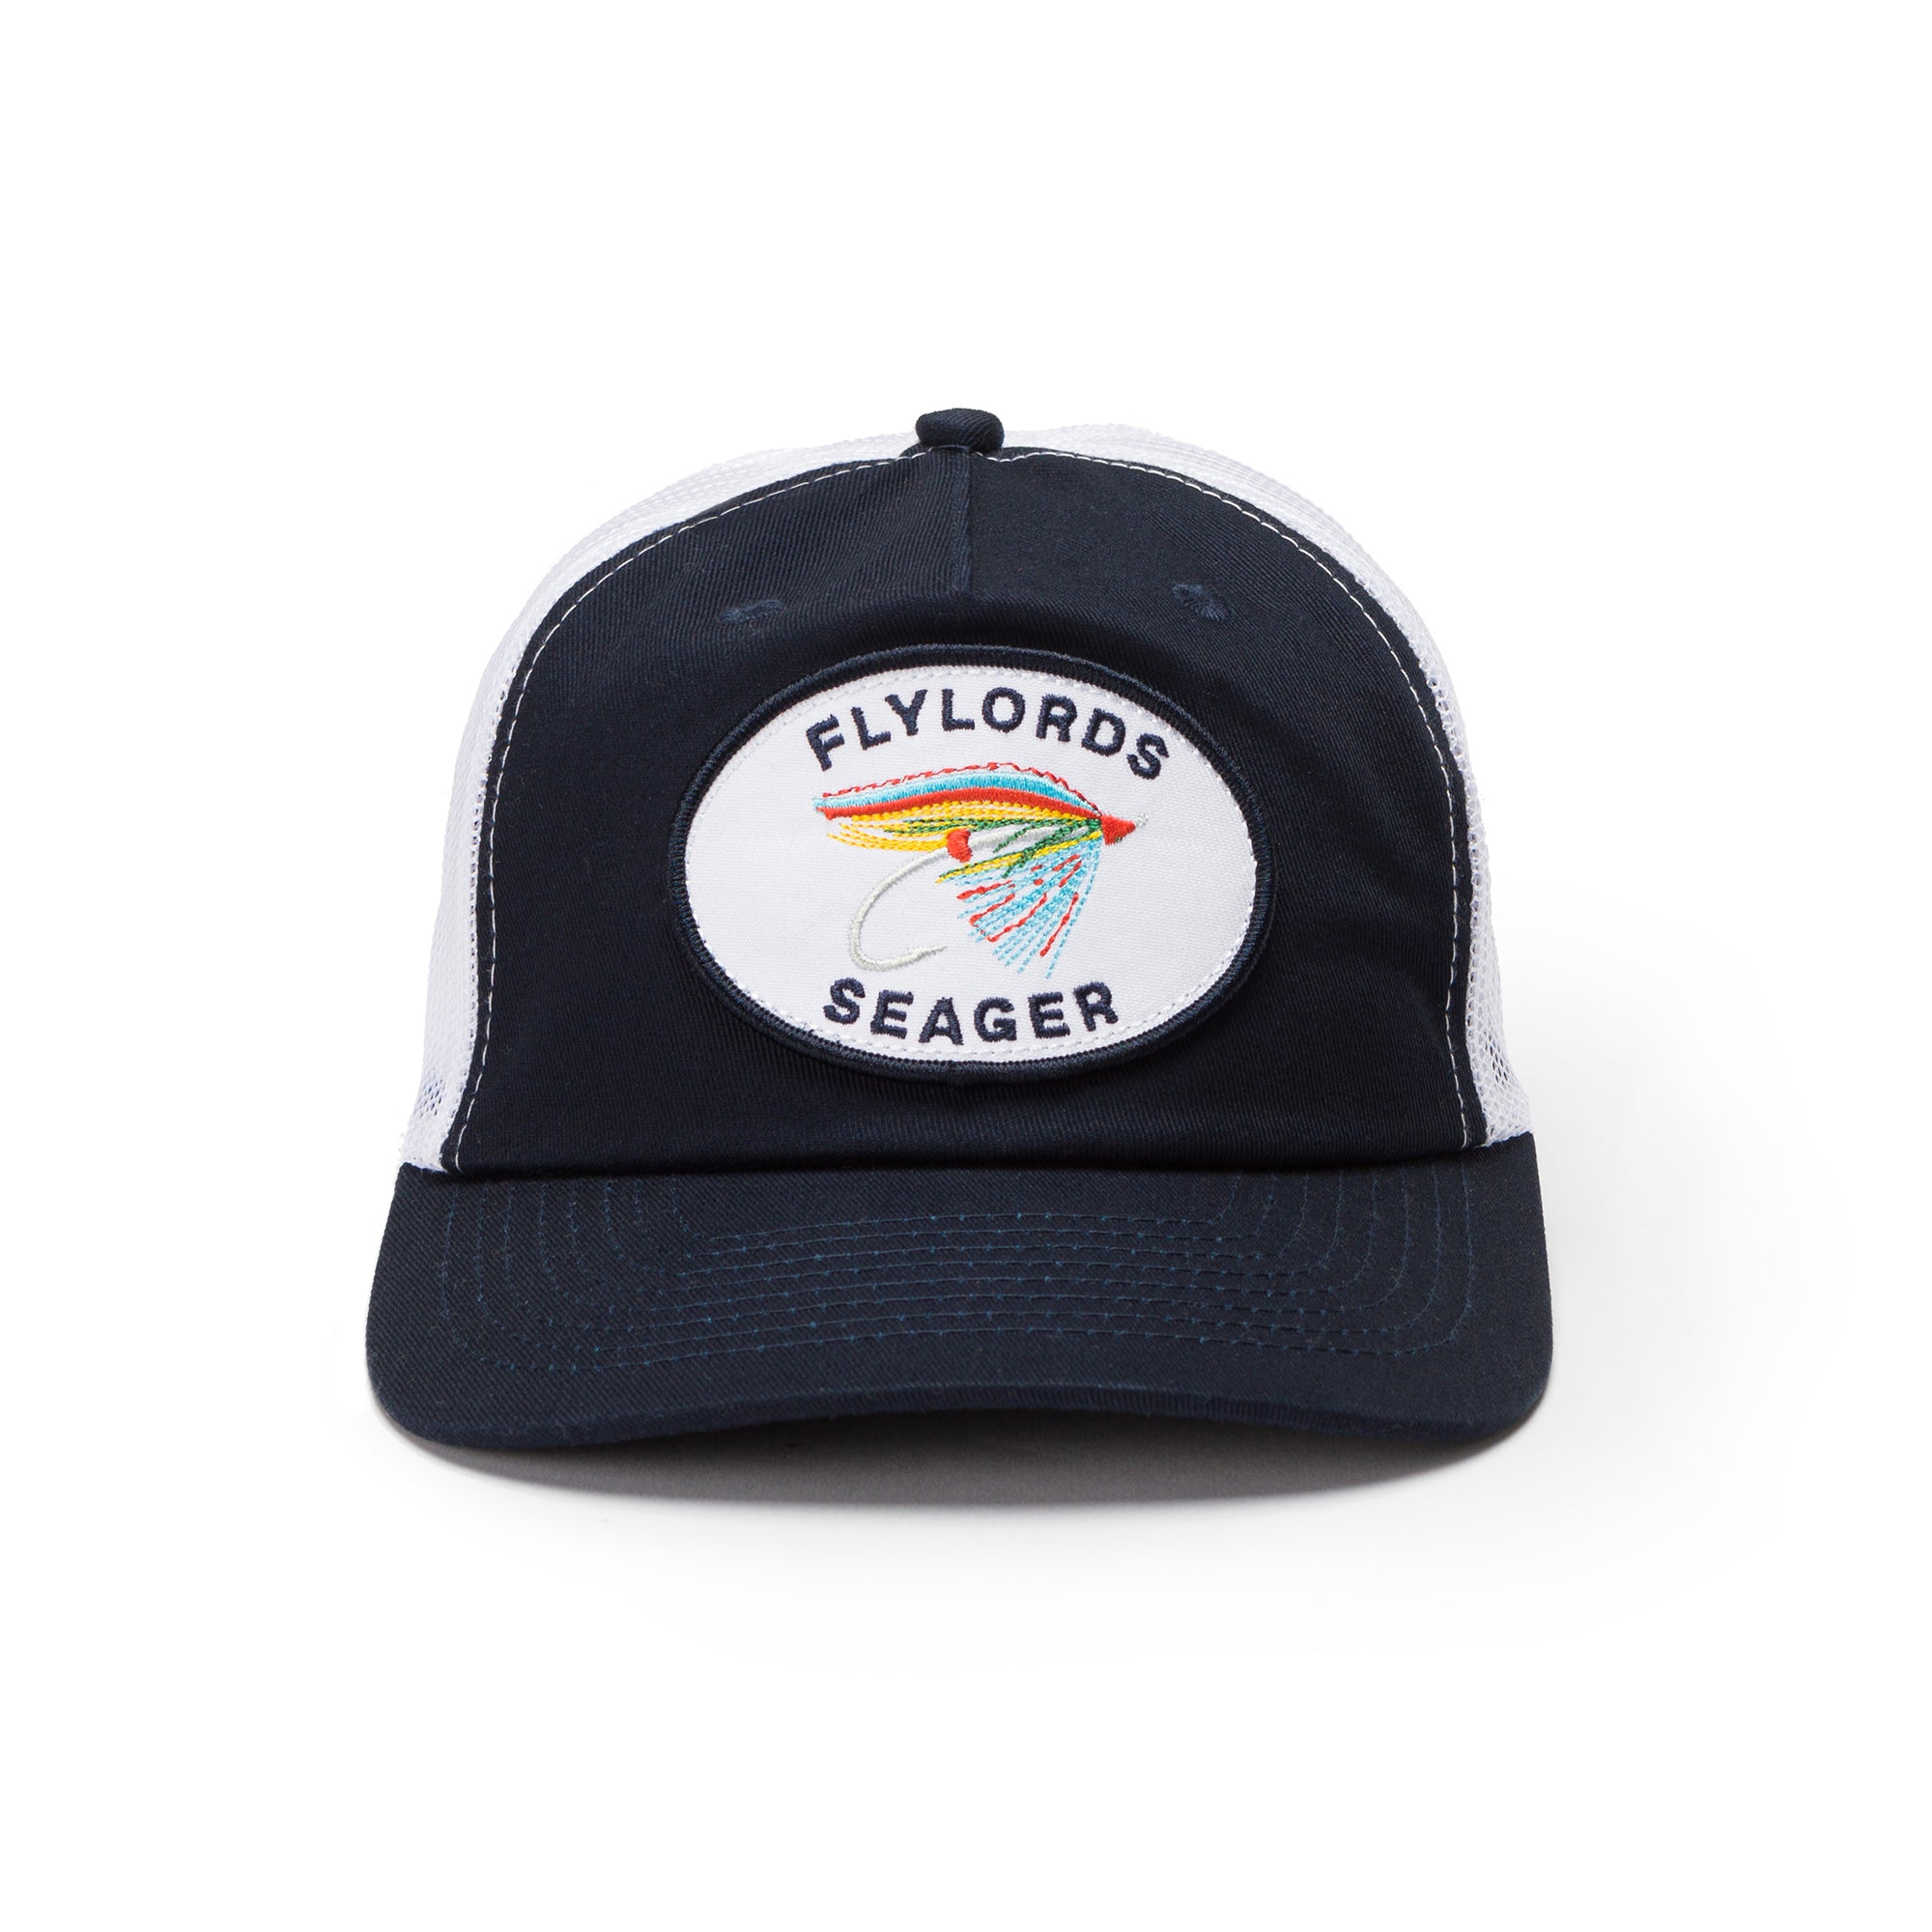 Seager x Flylords Mesh Snapback Navy